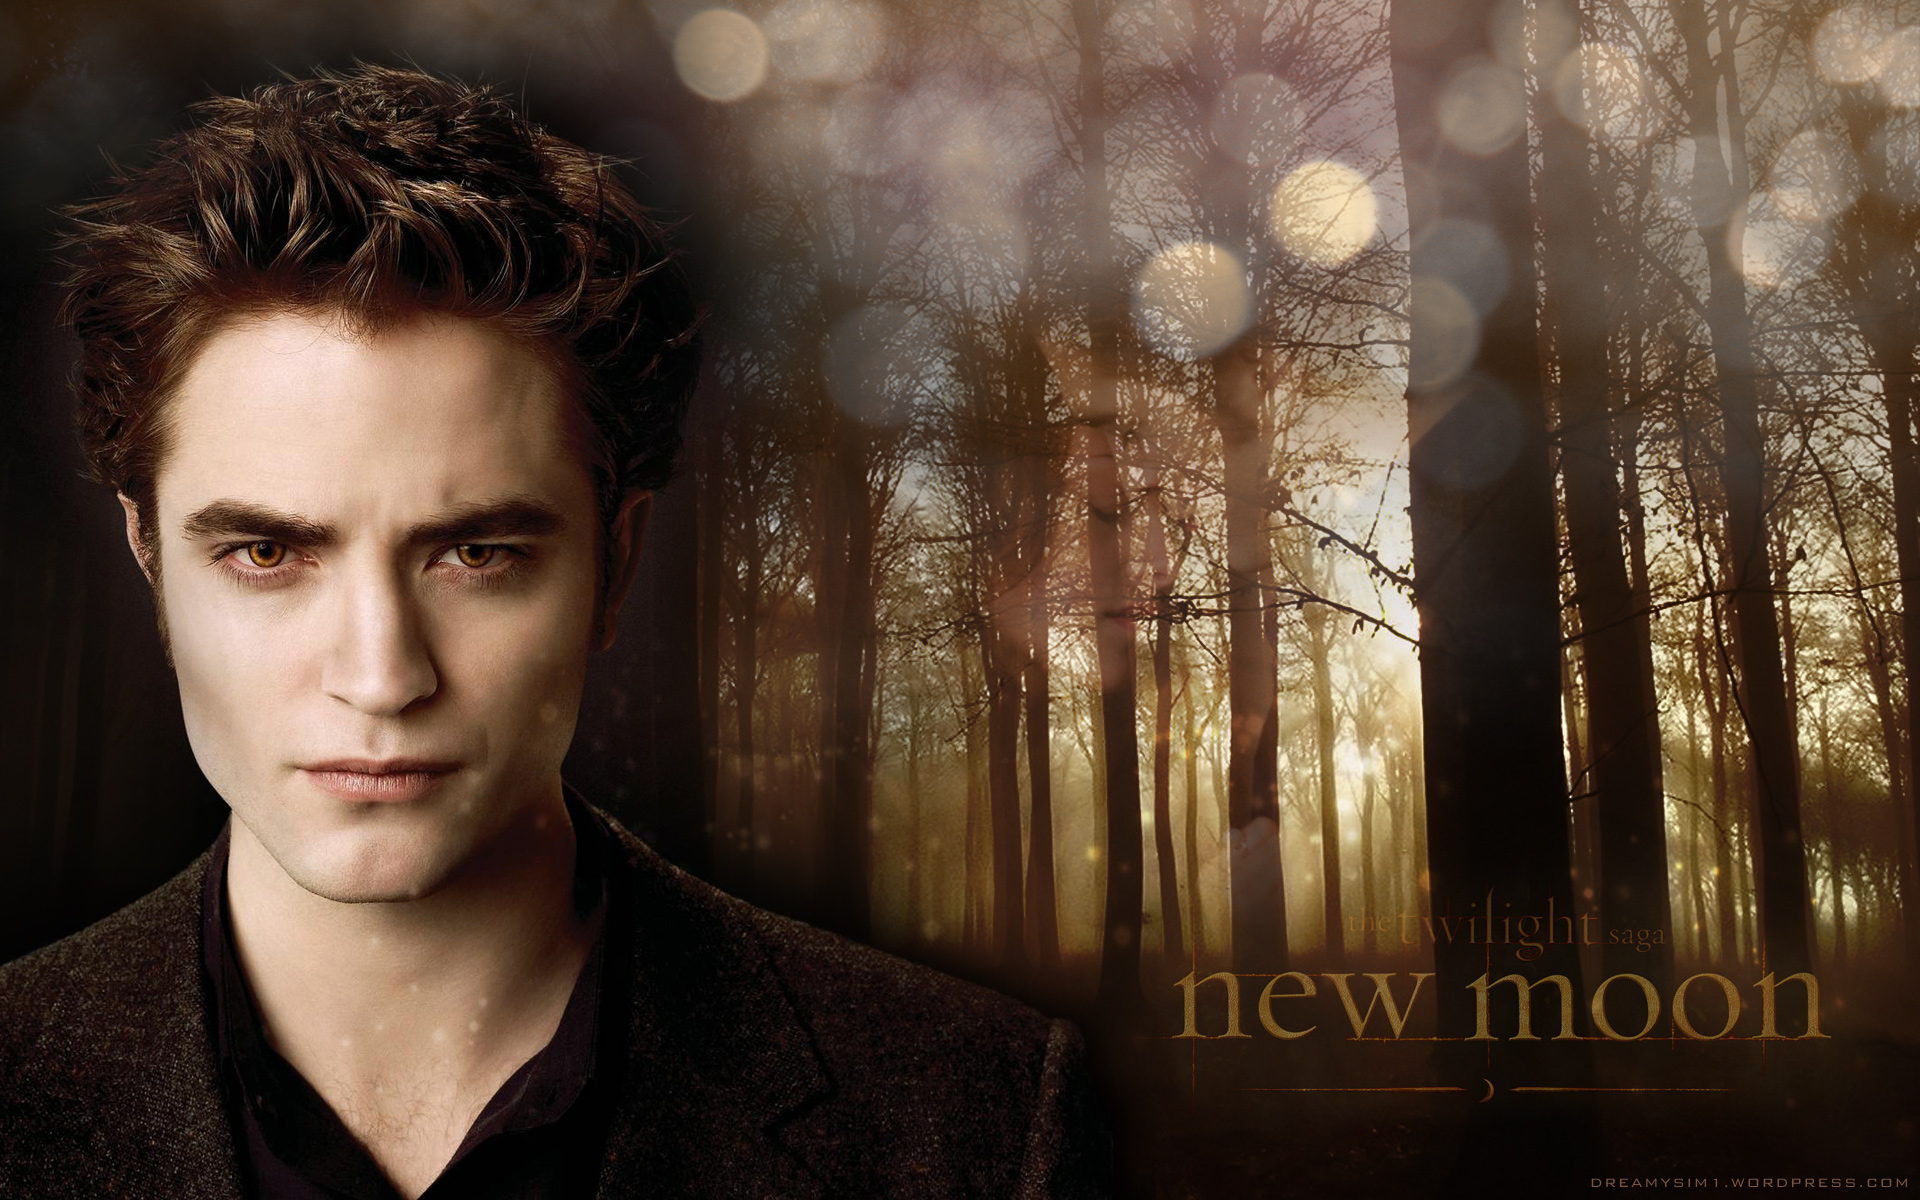 Gorgeous New Moon Background With Robert Pattinson